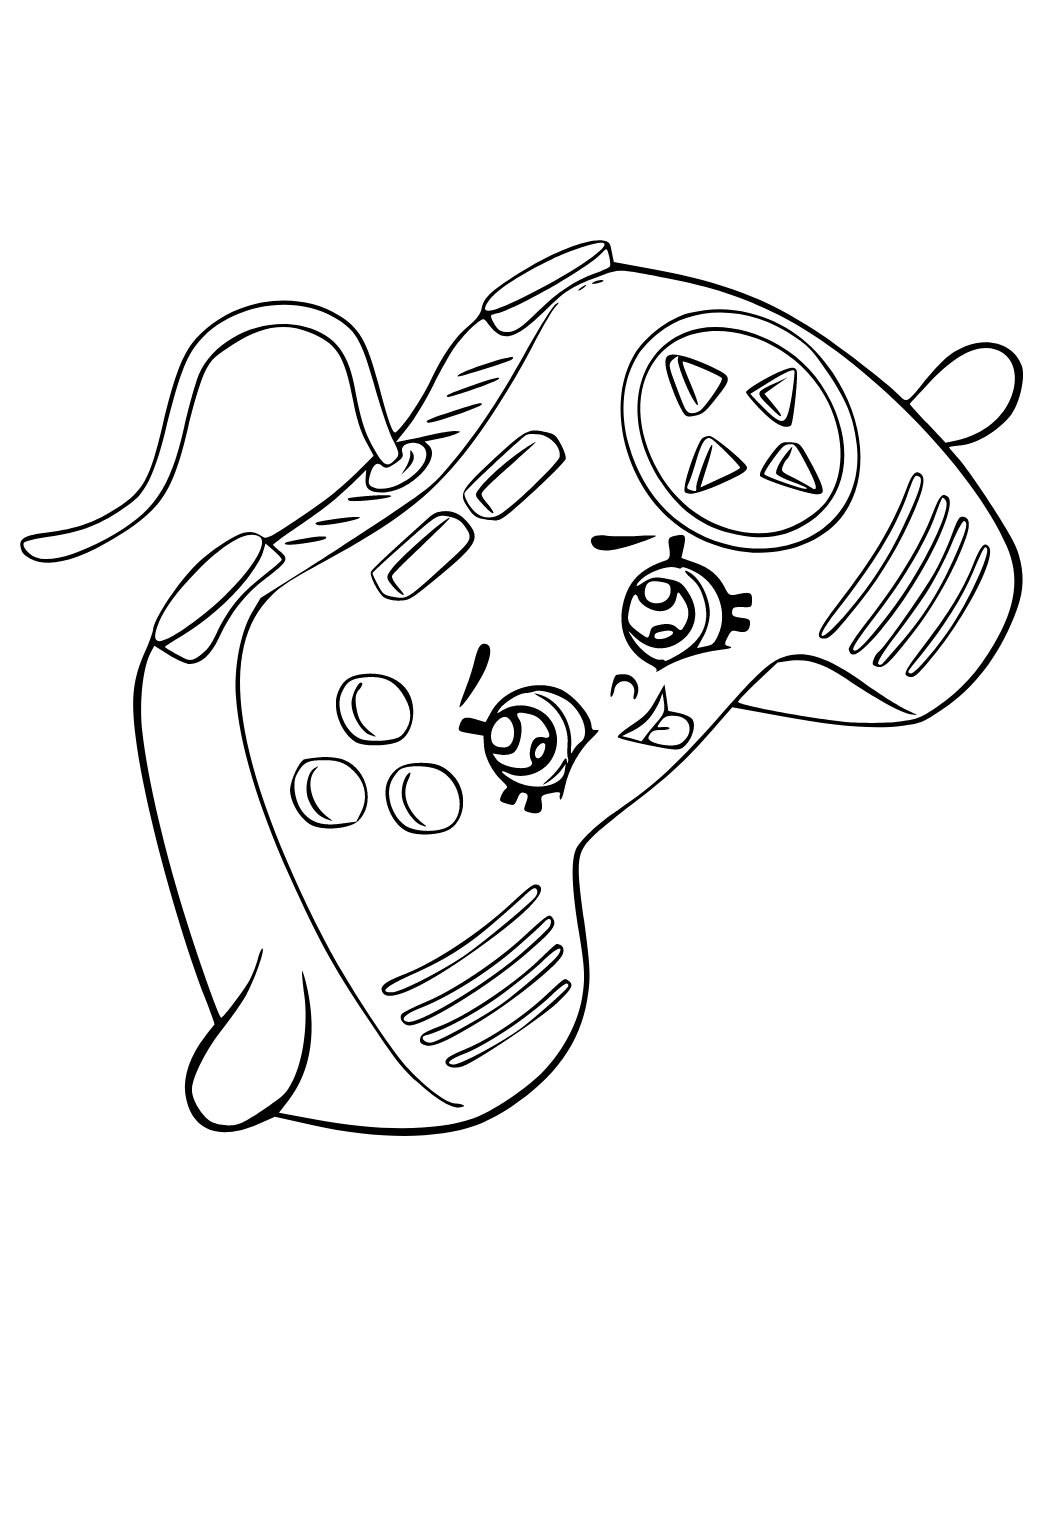 Free printable games joystick coloring page for adults and kids